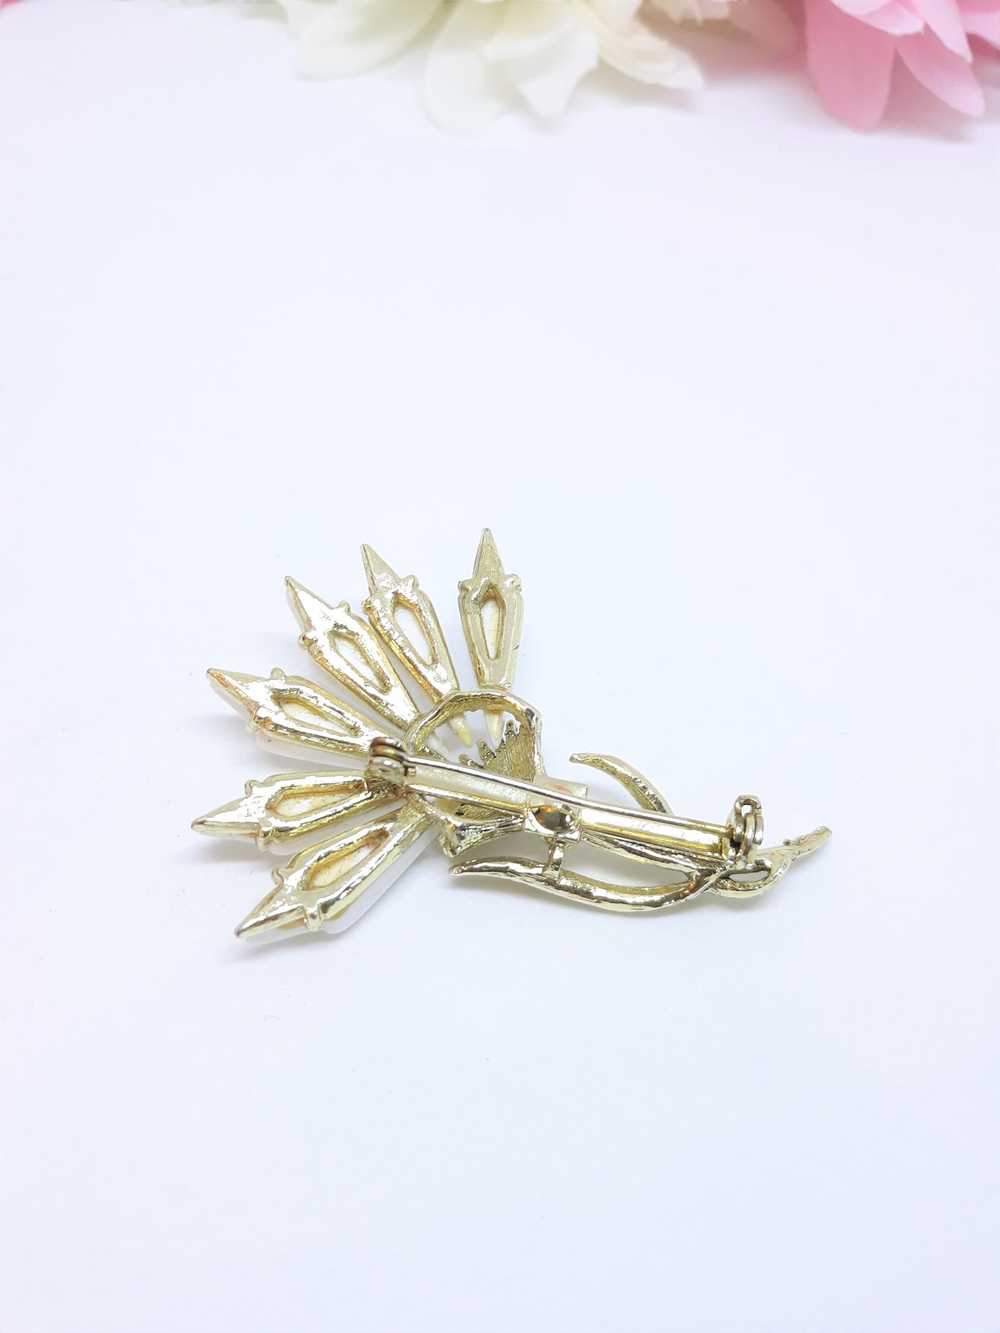 White Thermoset Vintage Thistle Brooch, 1950s-60s - image 7